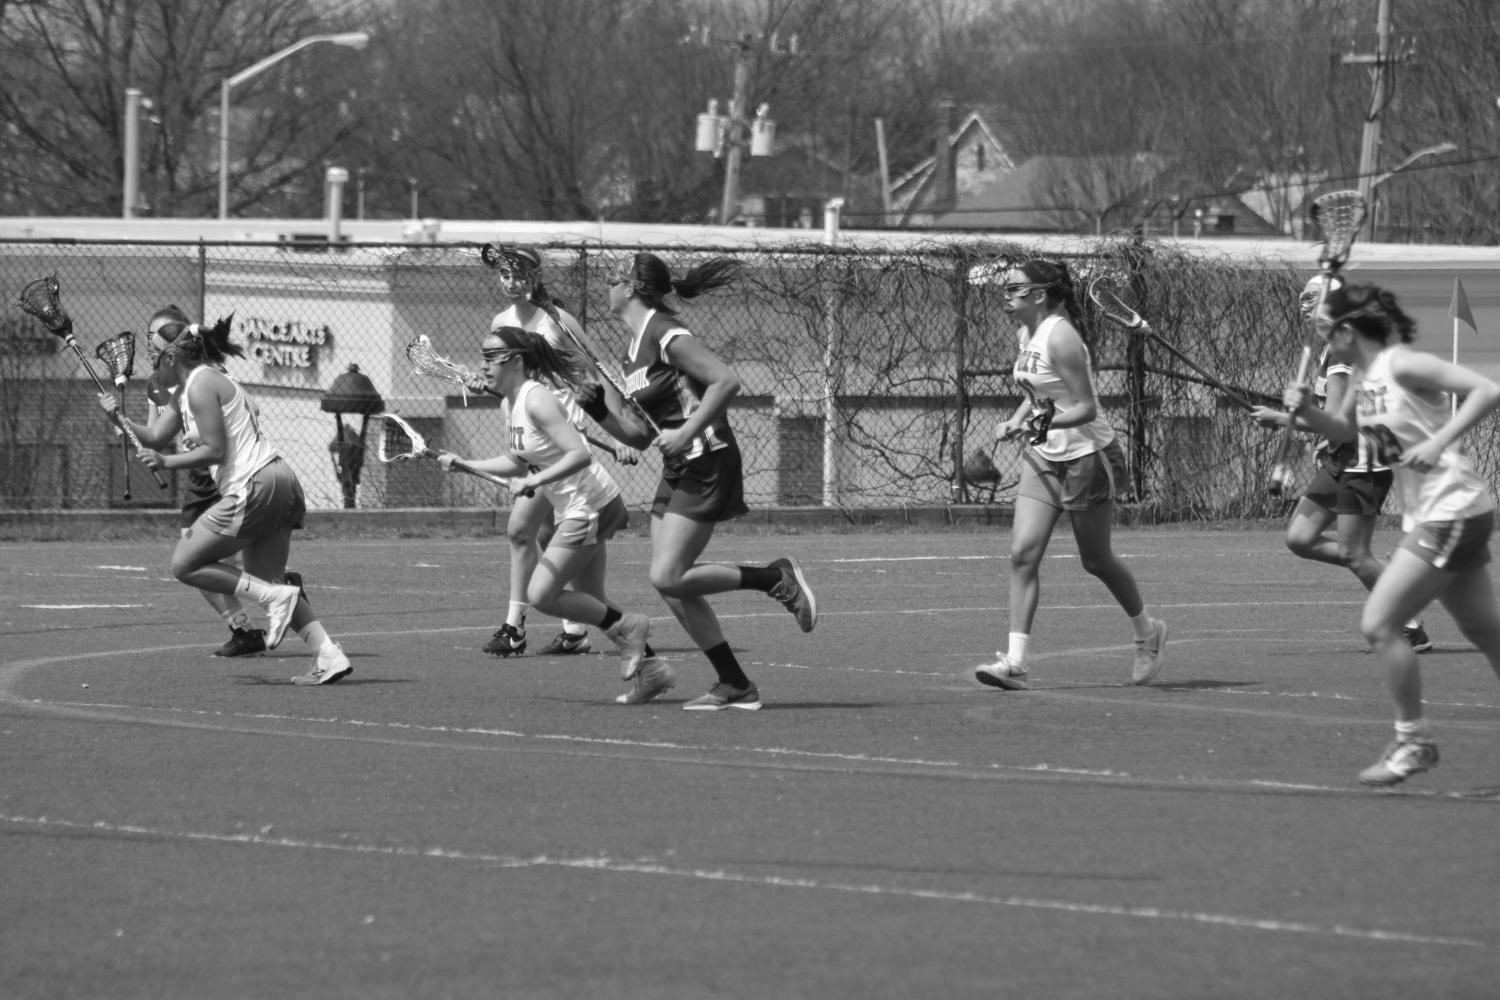 The Vikings girls lacrosse team skirmishes midfield at a home game against Lynbrook on April 10. The Vikings won the game 15-7.